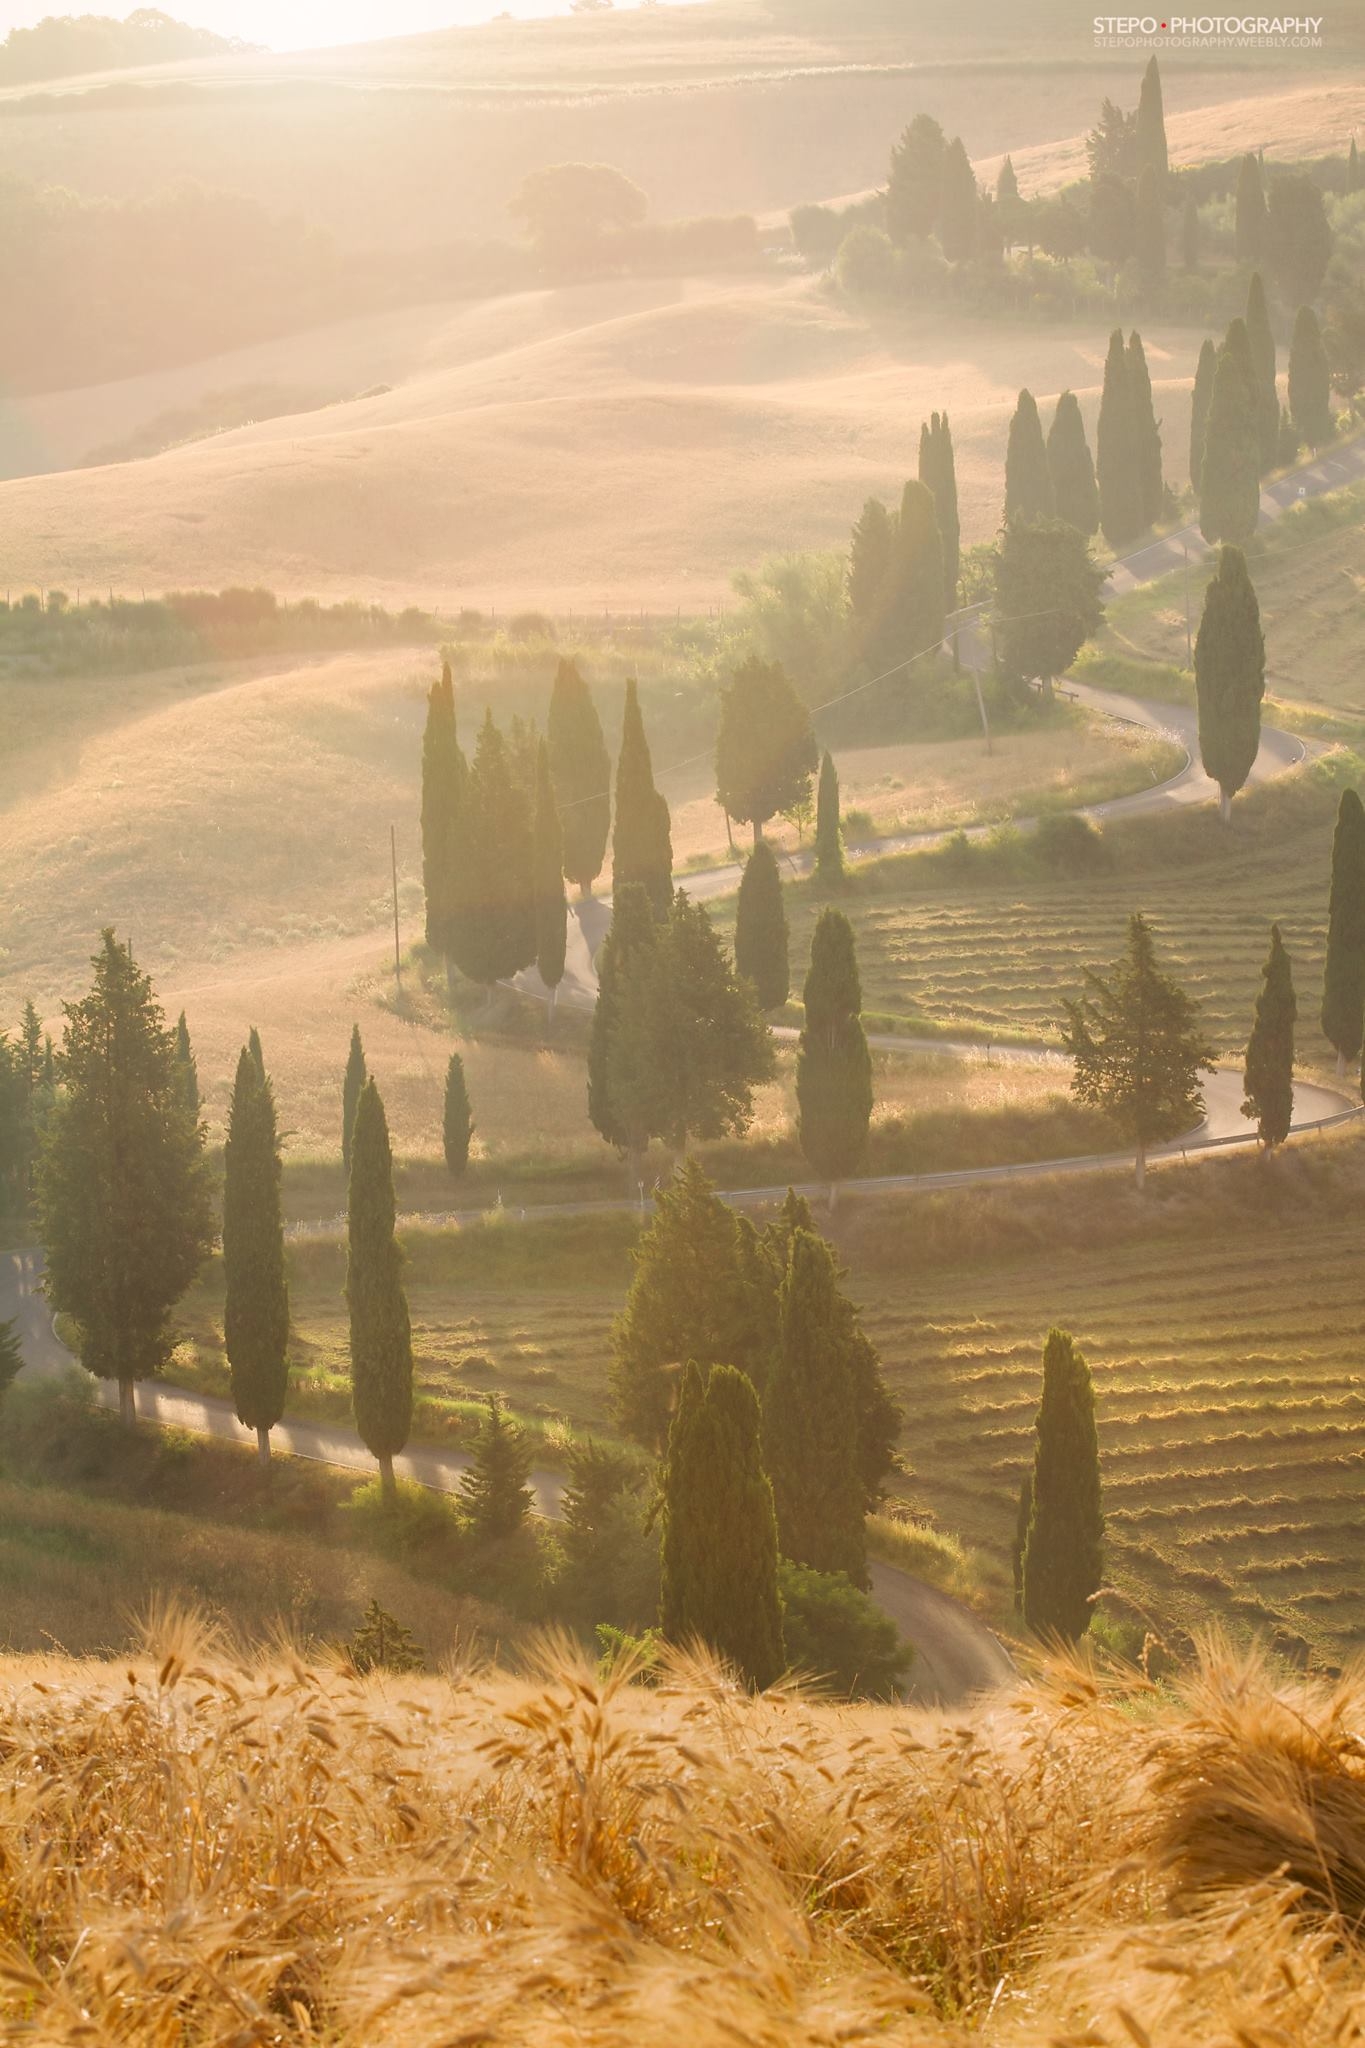 Tuscany in a dream...